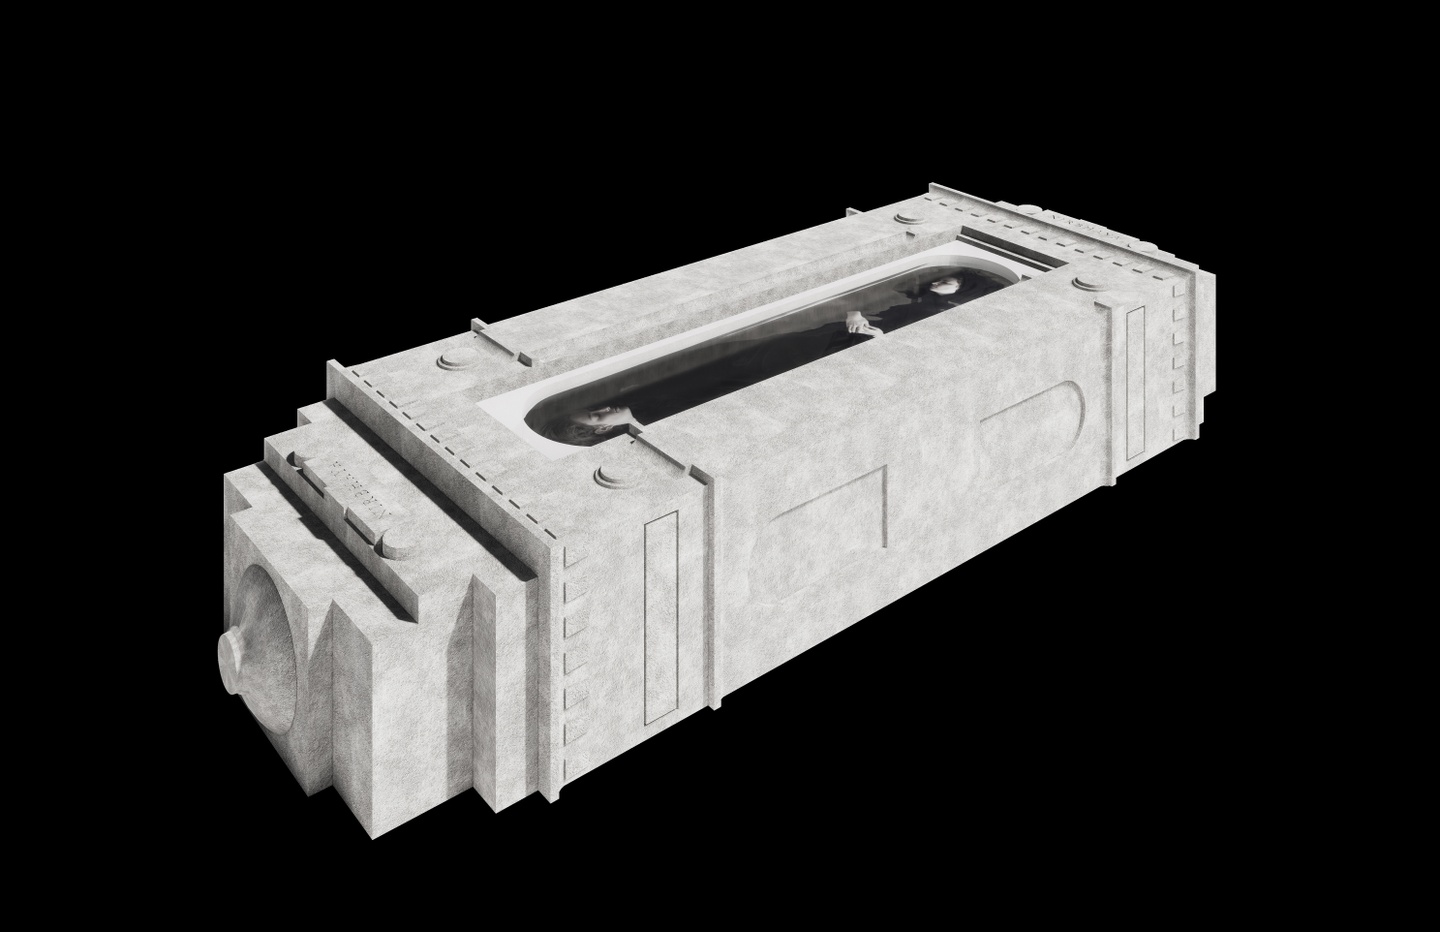 A rendering of an architectural form; the monument is in a light gray, marble/concrete-like texture, set against a black background. In the center of its surface/façade is a pill-shaped recess, in which water seems to flow, reflecting two faces (one at each end) and a pair of hands. The people depicted in this pool have their eyes closed, and their hands are interlocked.